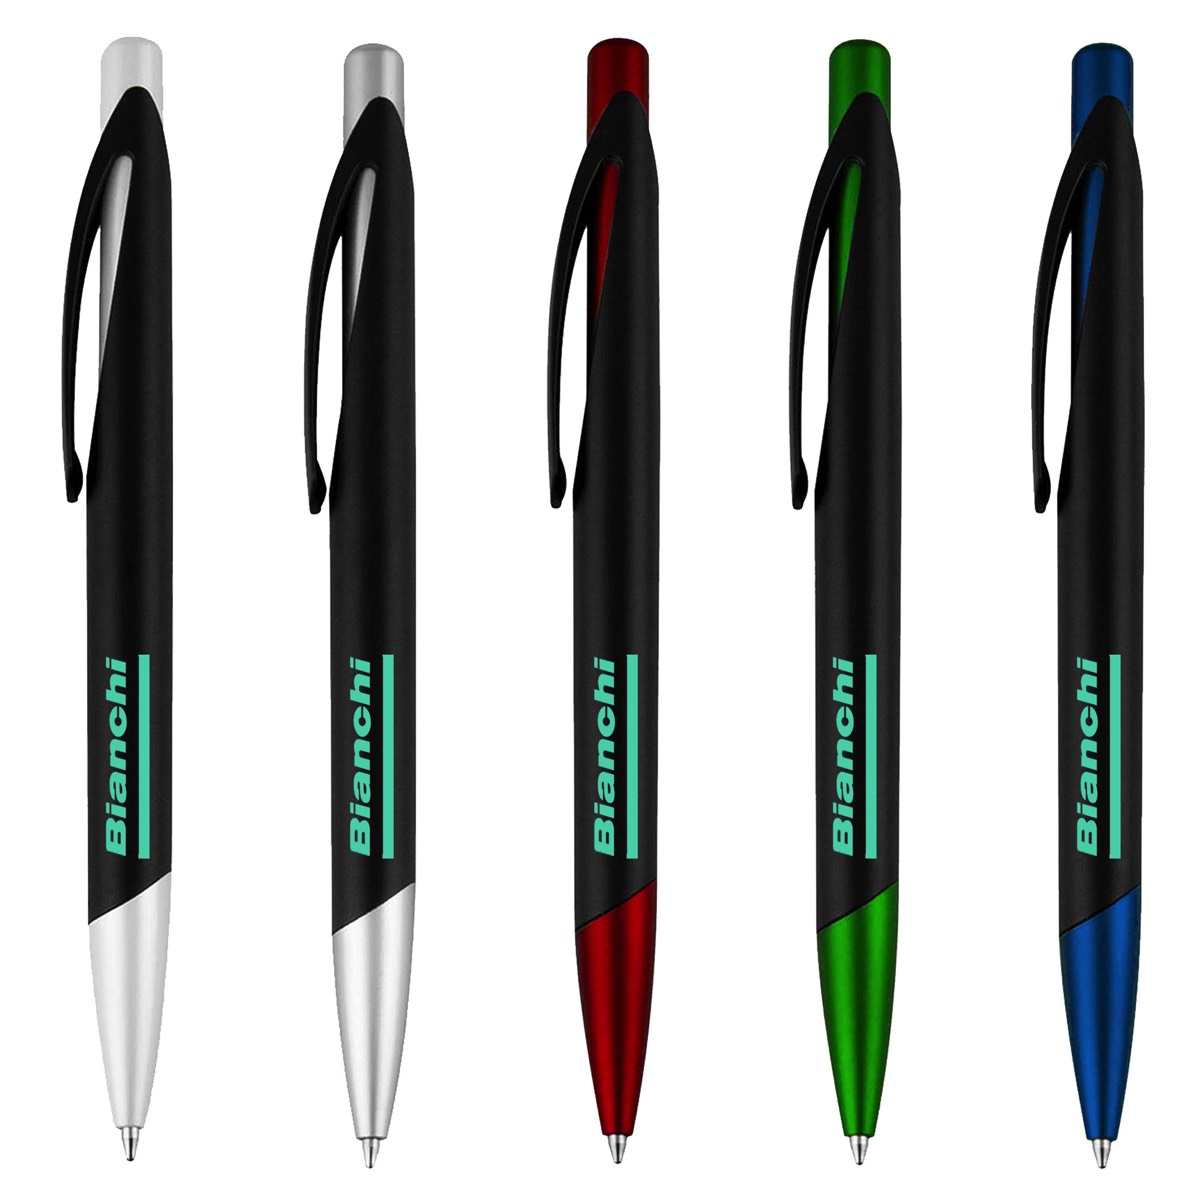 elevate plastic pens with black barrel and coloured highlights